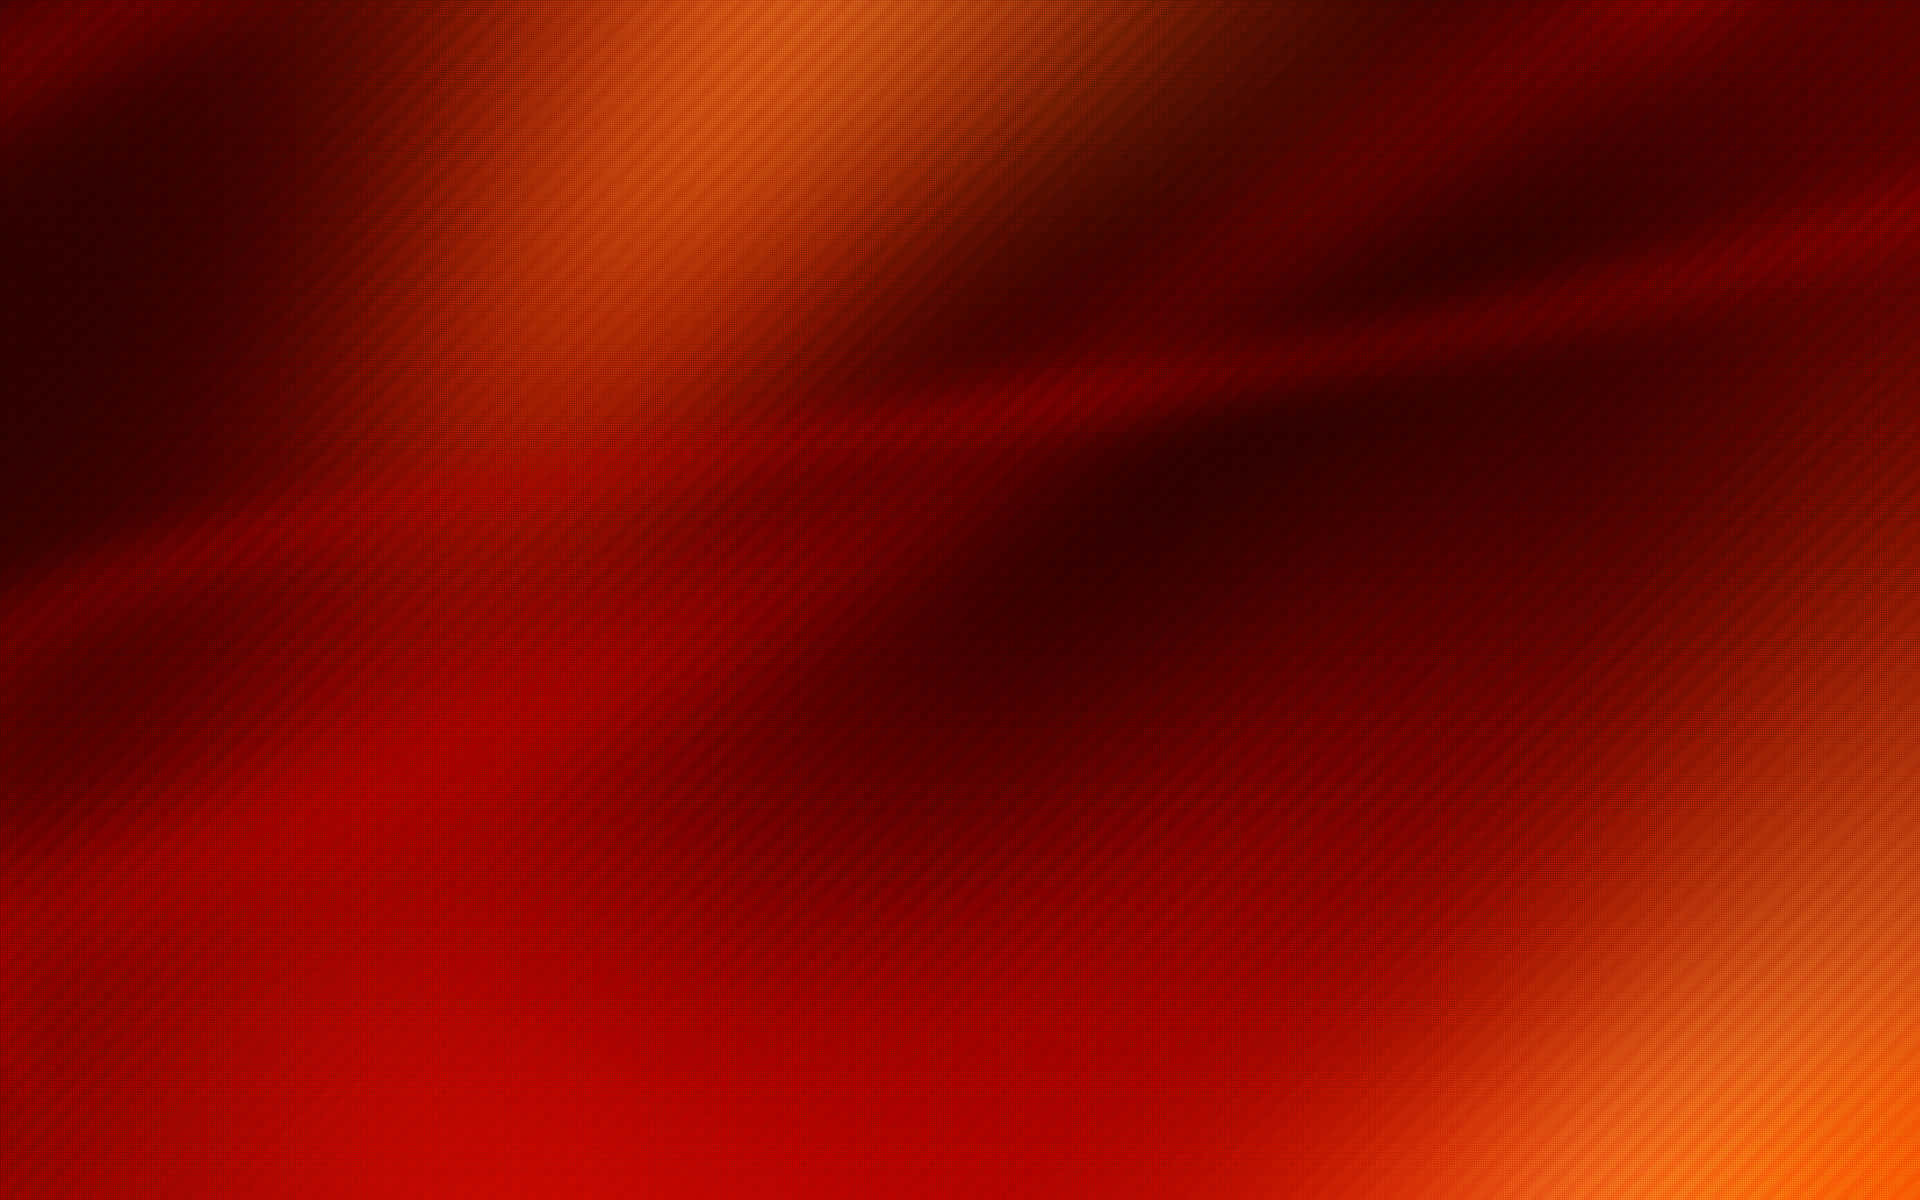 Vibrant red background